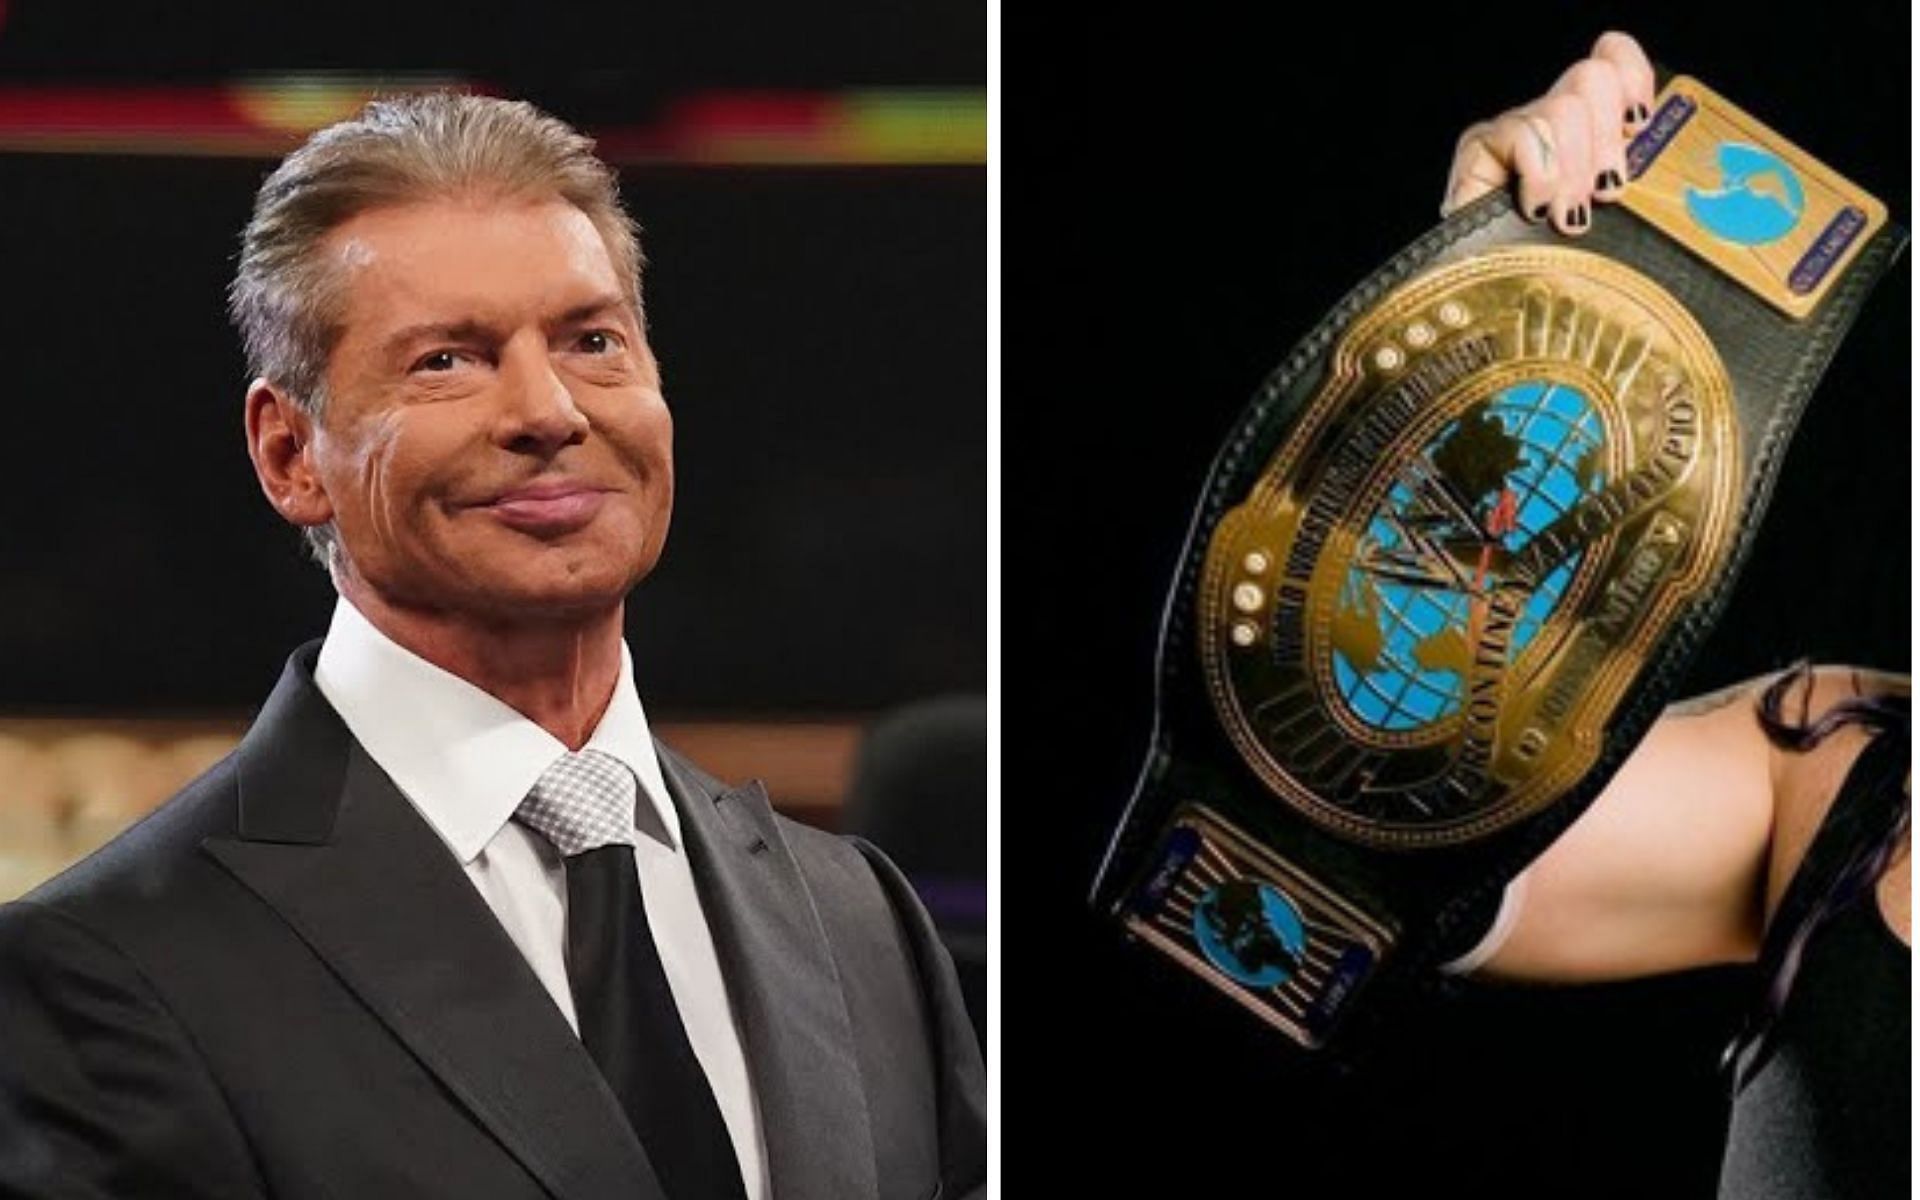 Vince McMahon defeated Triple H to win WWF title